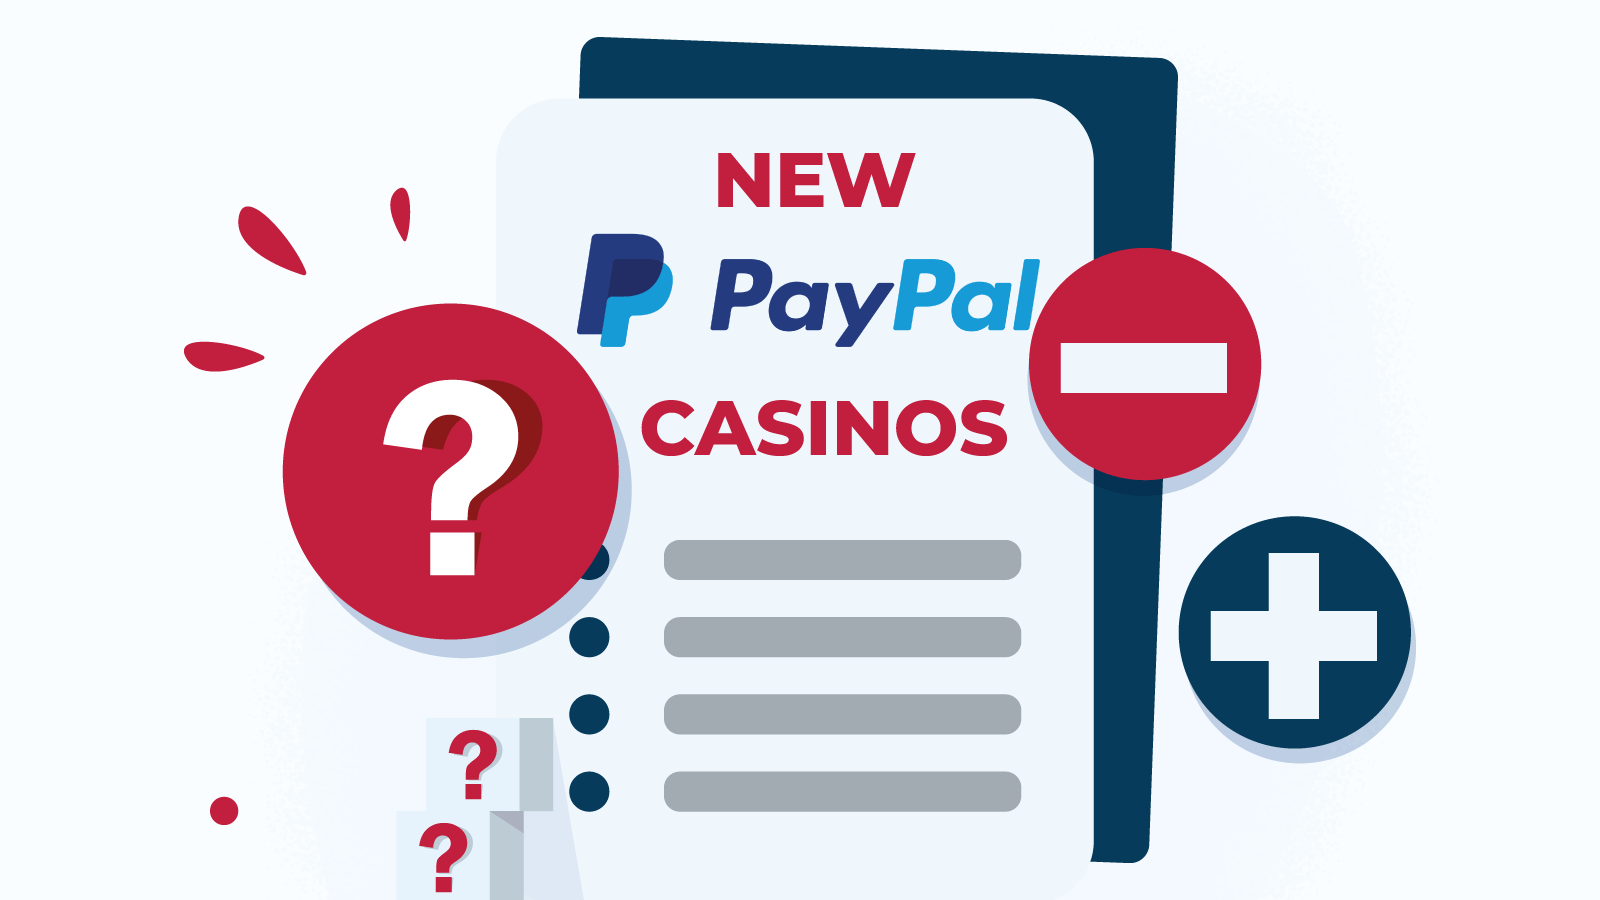 (BEFORE) Why Choose New PayPal Casinos